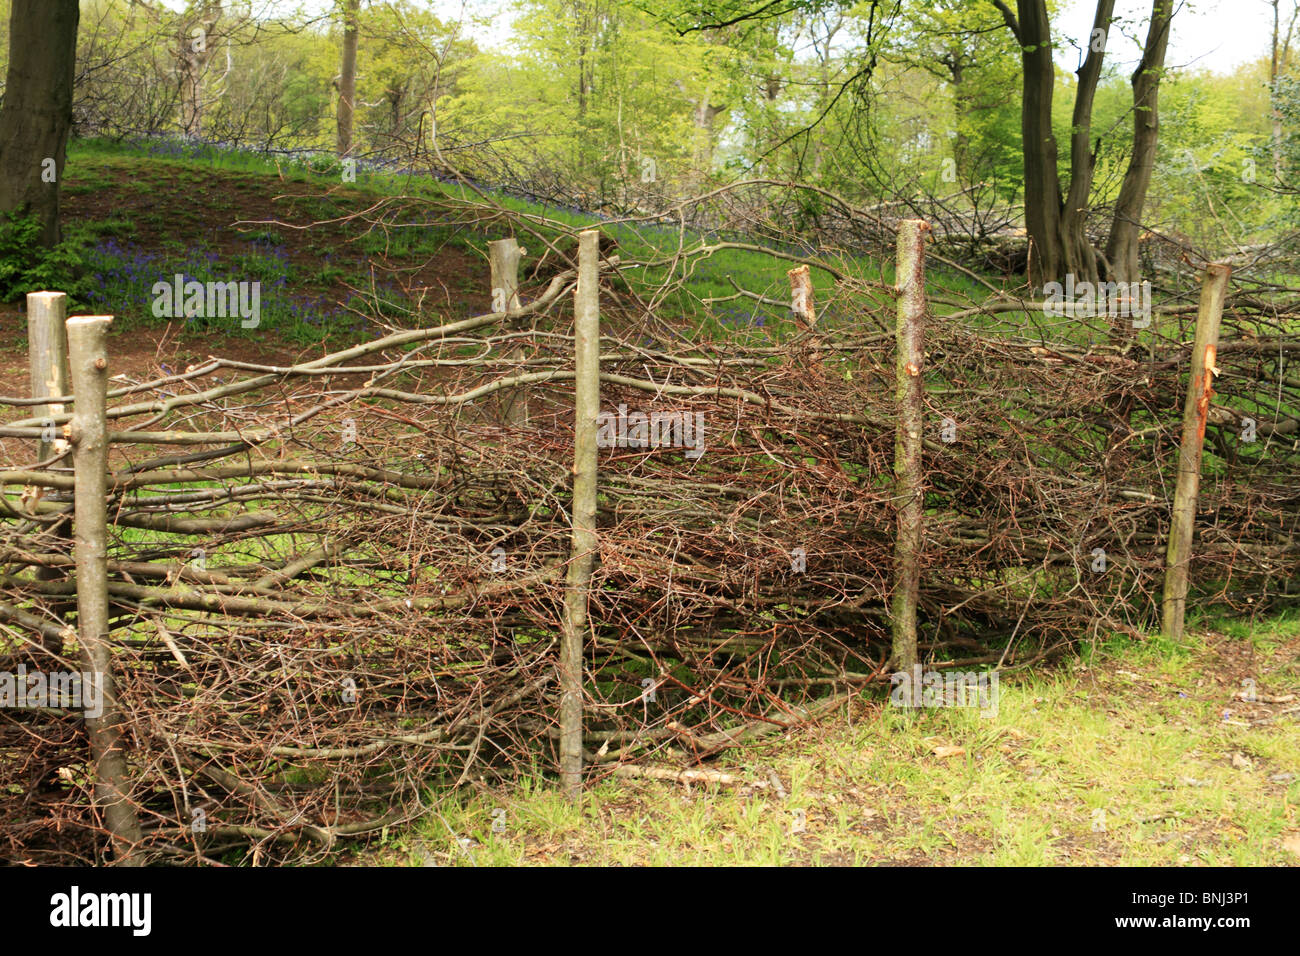 Dead hedge around coppiced woodland, Norsey Wood, Essex UK Stock Photo